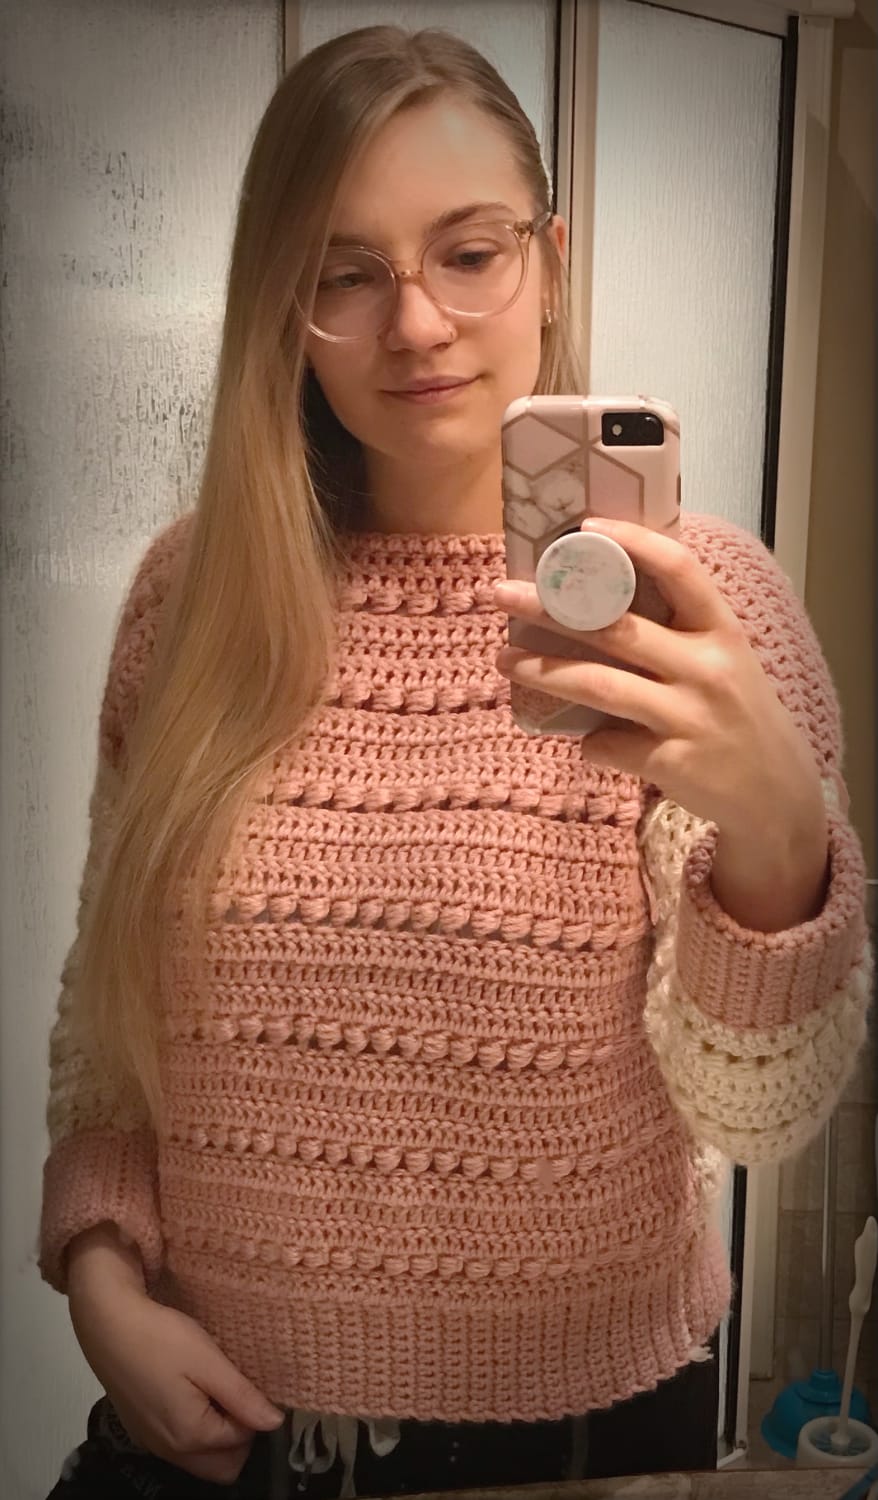 Started crocheting about a month ago and just finished making my first ever sweater. Many mistakes were made but I’m pretty proud of the result!